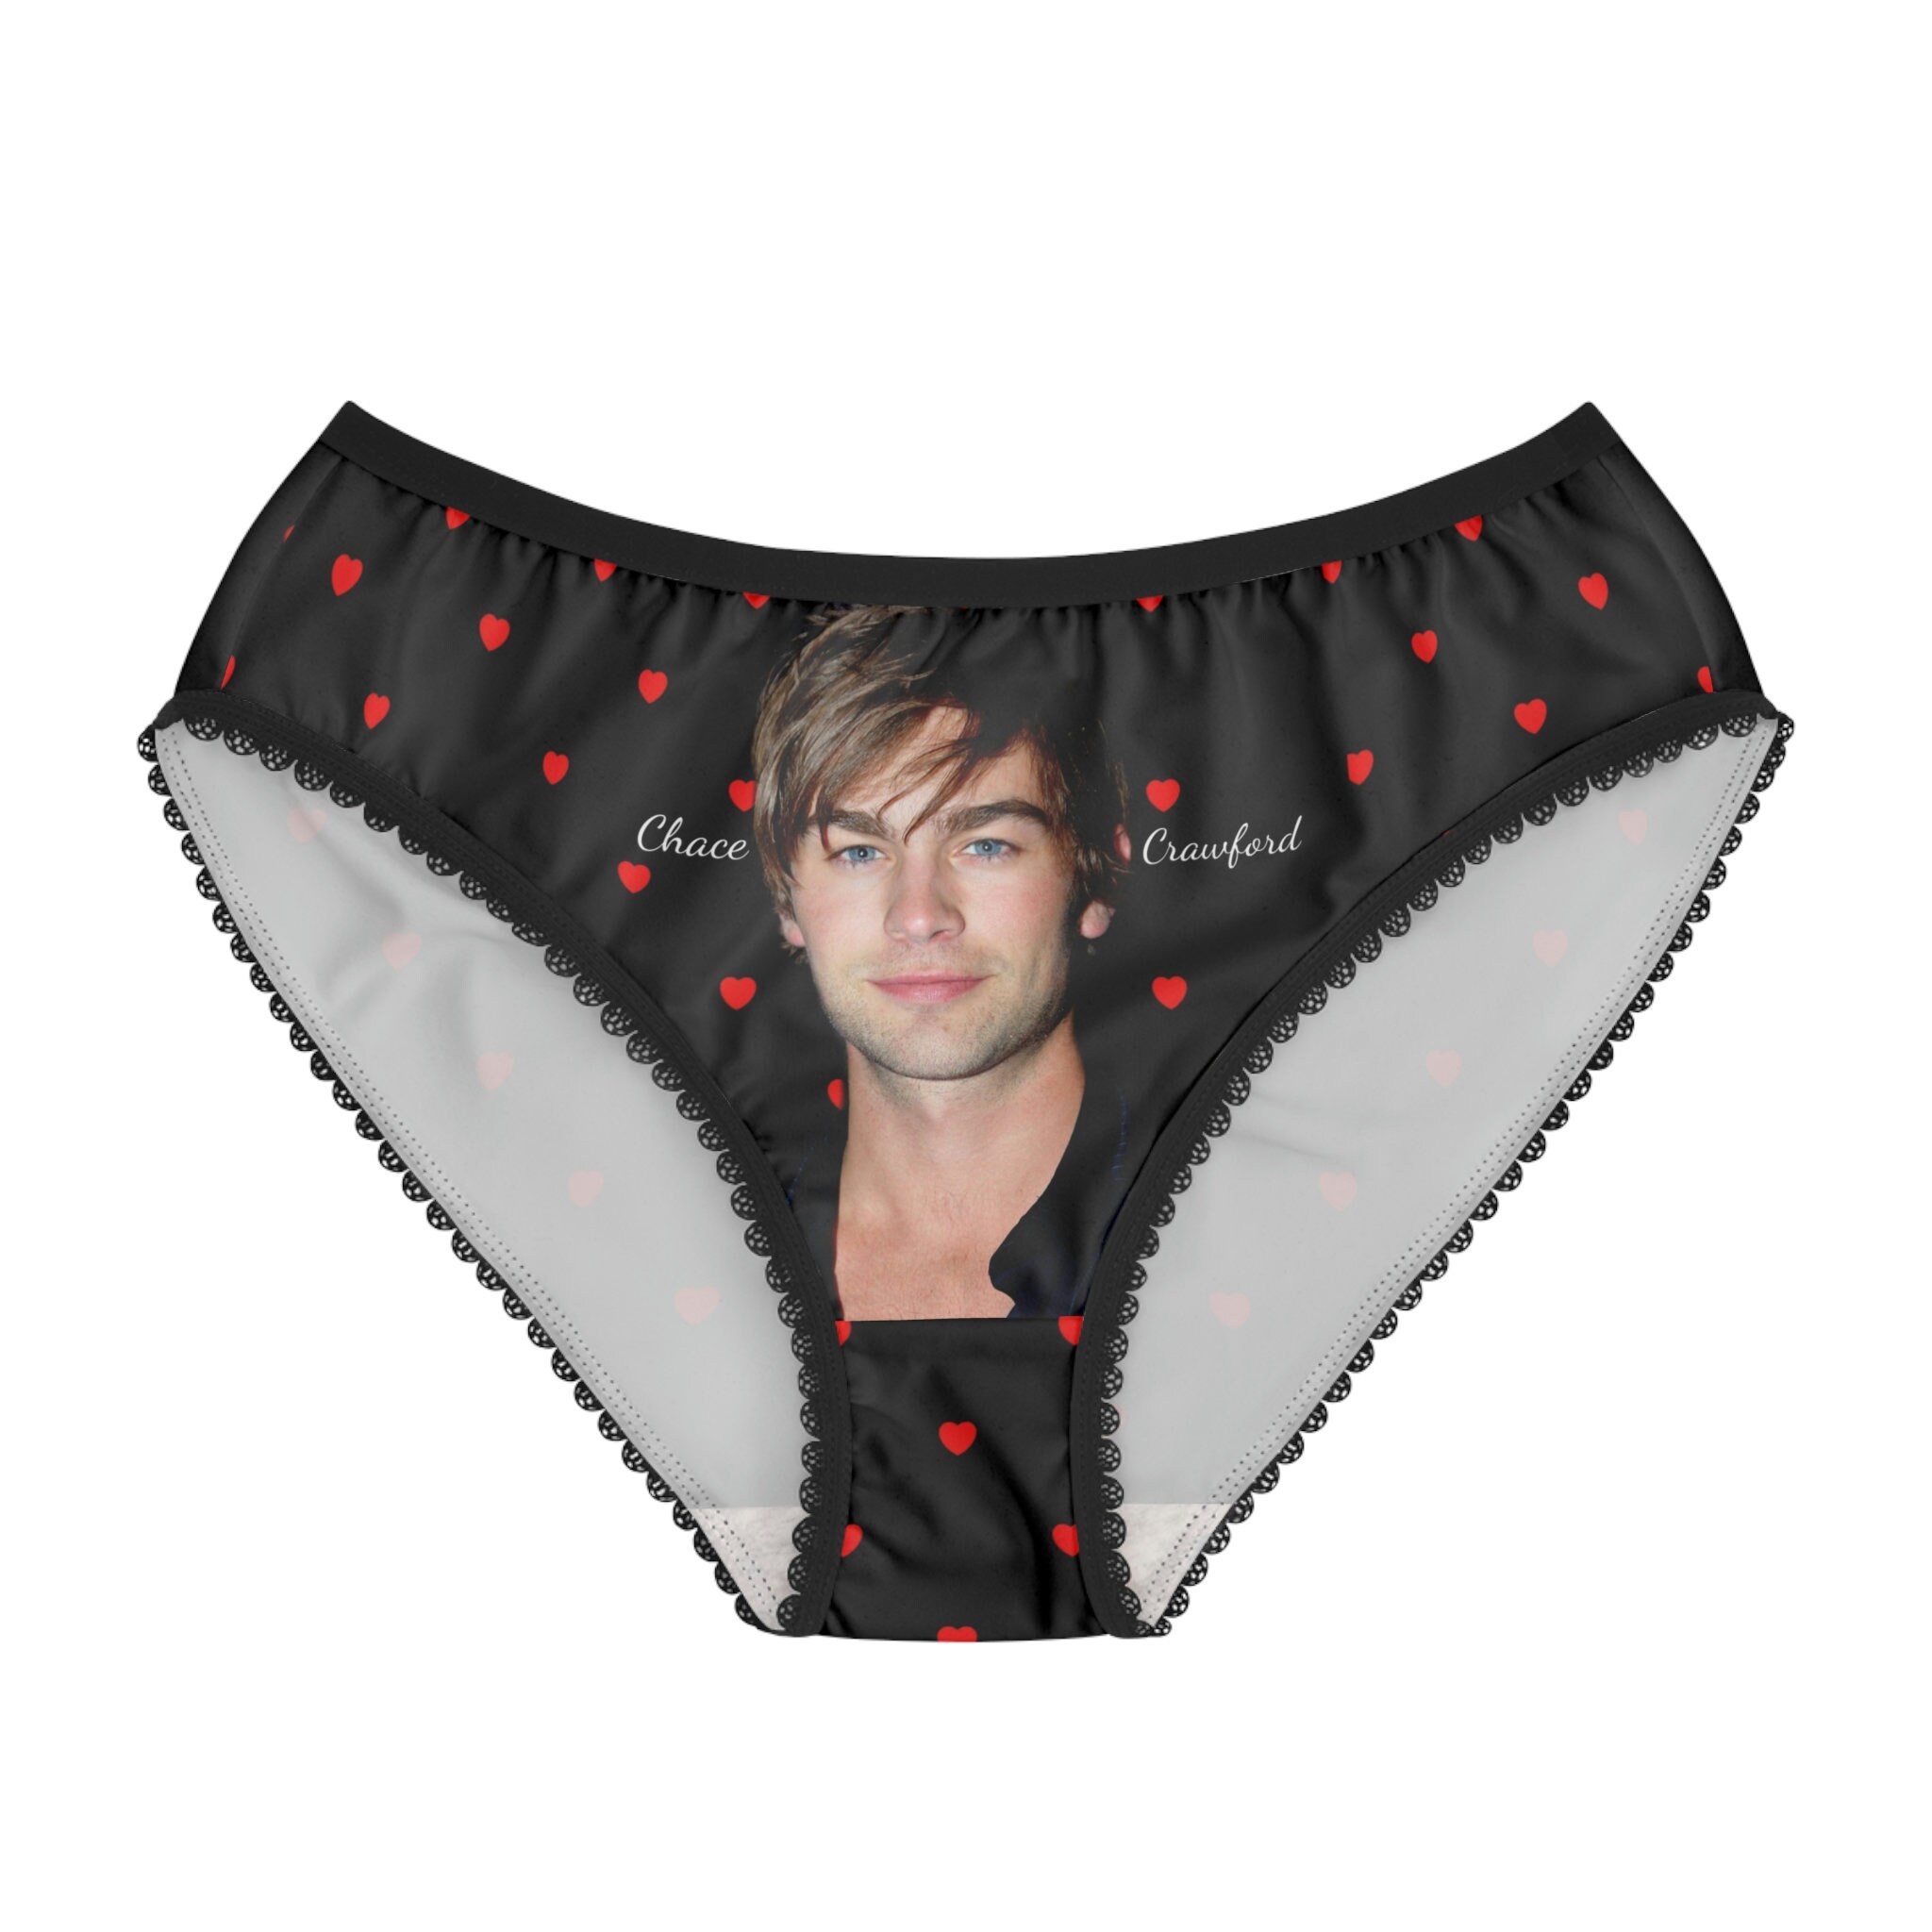 Chad Michael Murray Poka heart Knickers, Women's Briefs all sizes available